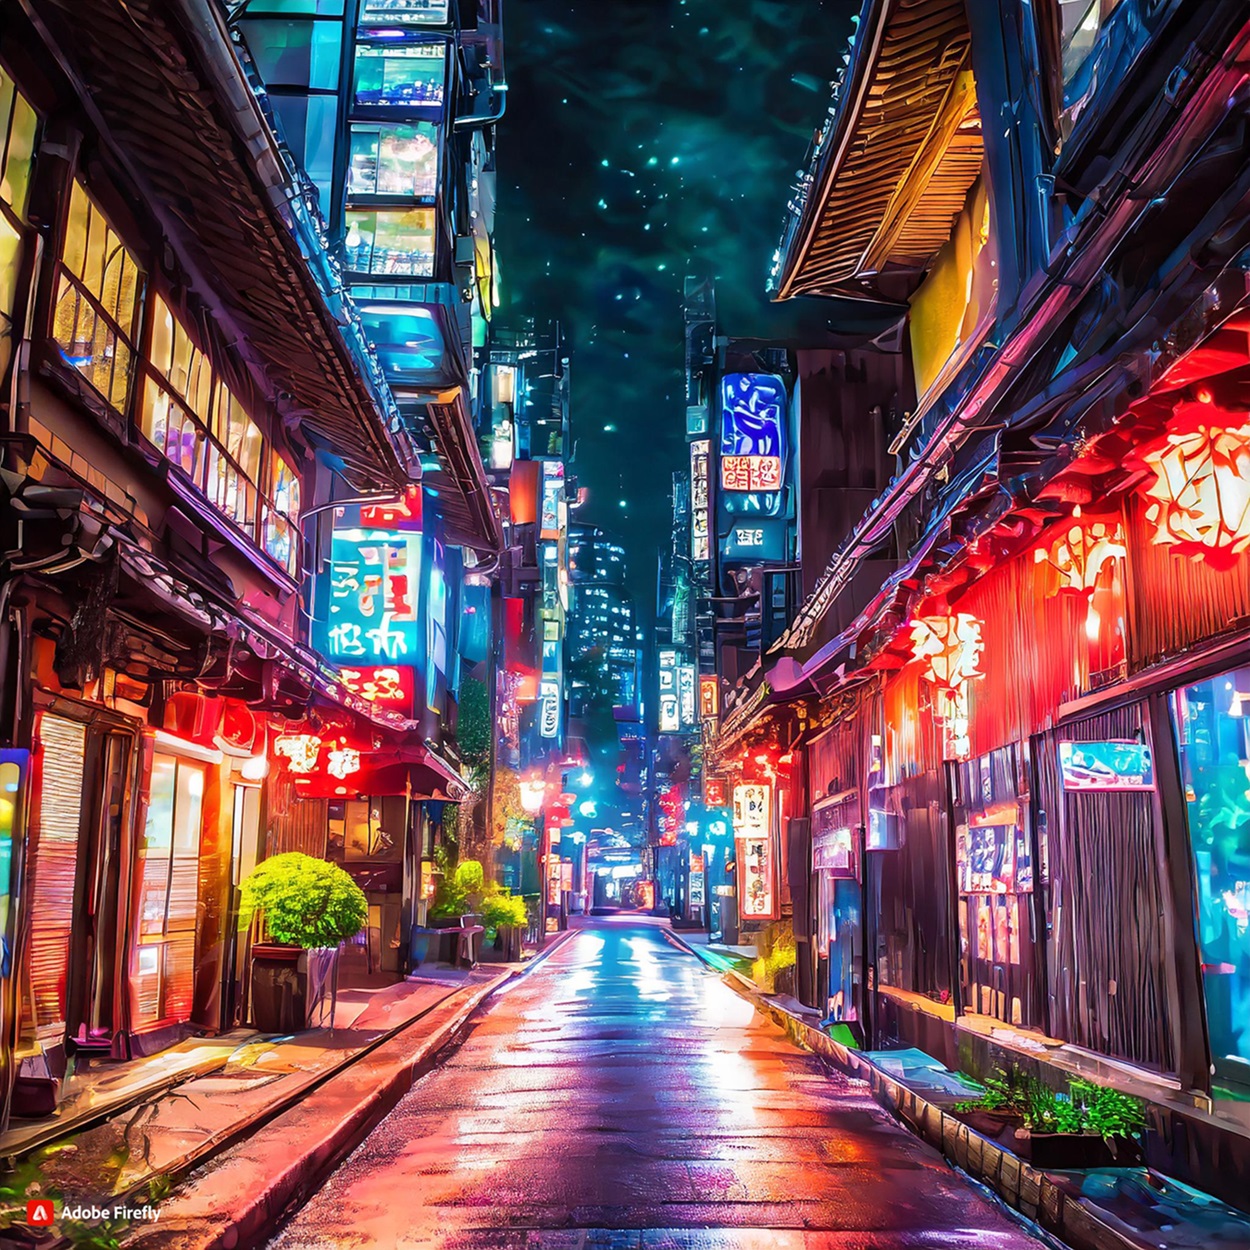  Firefly japanese style street with tall buildings lit by neon lights and signs during the night 9659.jpg